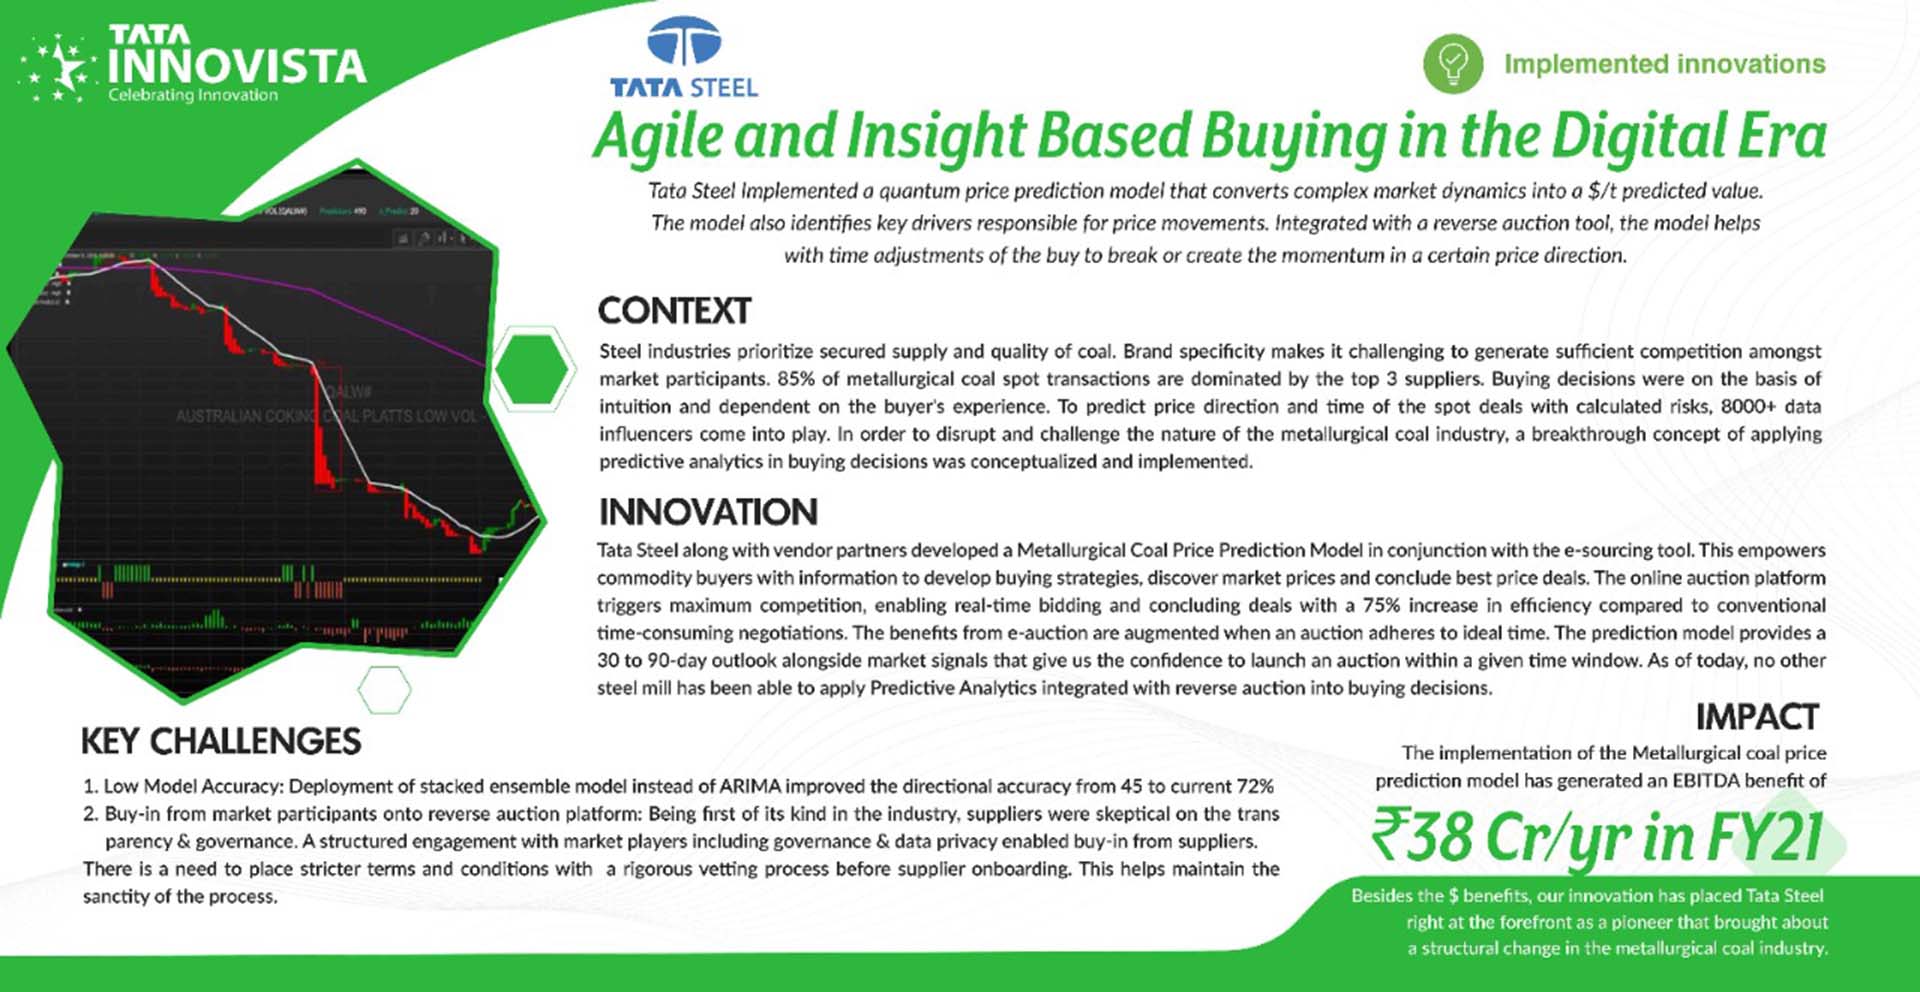 Agile and Insight Based Buying in the Digital Era